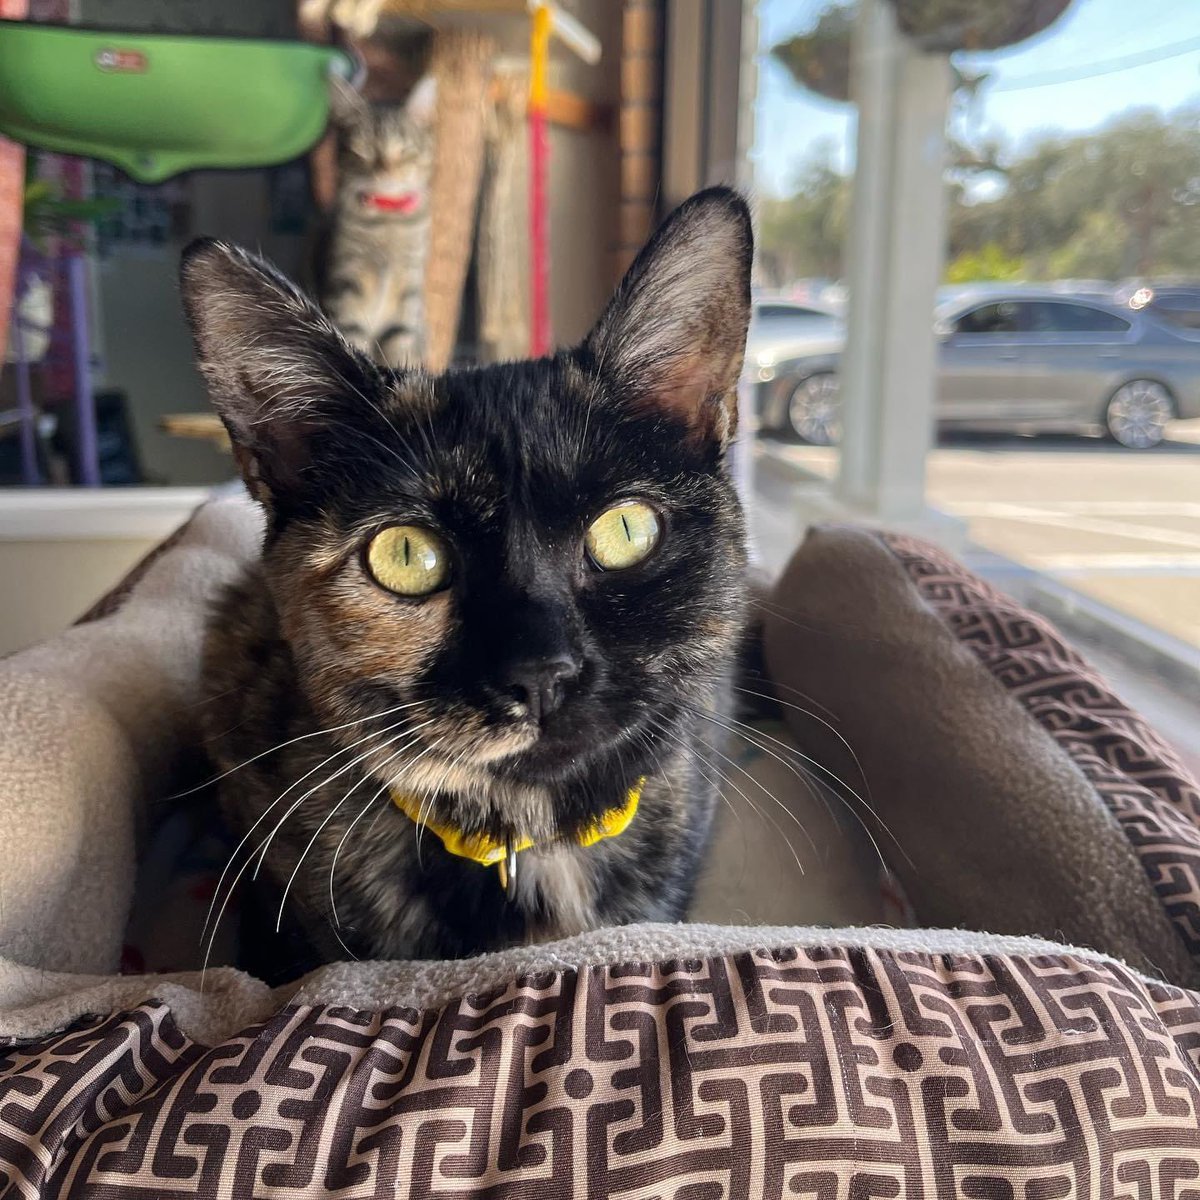 Yellowfoot is a sweet, 2-year-old, kitty who was rescued from a bad situation where she was abused.. 😖 she is a tortoiseshell with one yellow foot. She has been adopted and returned 2x through NO FAULT of her own. She is such a sweet girl ready to be adopted for good! 🙏🏻 🥺 👉🏻👈🏻